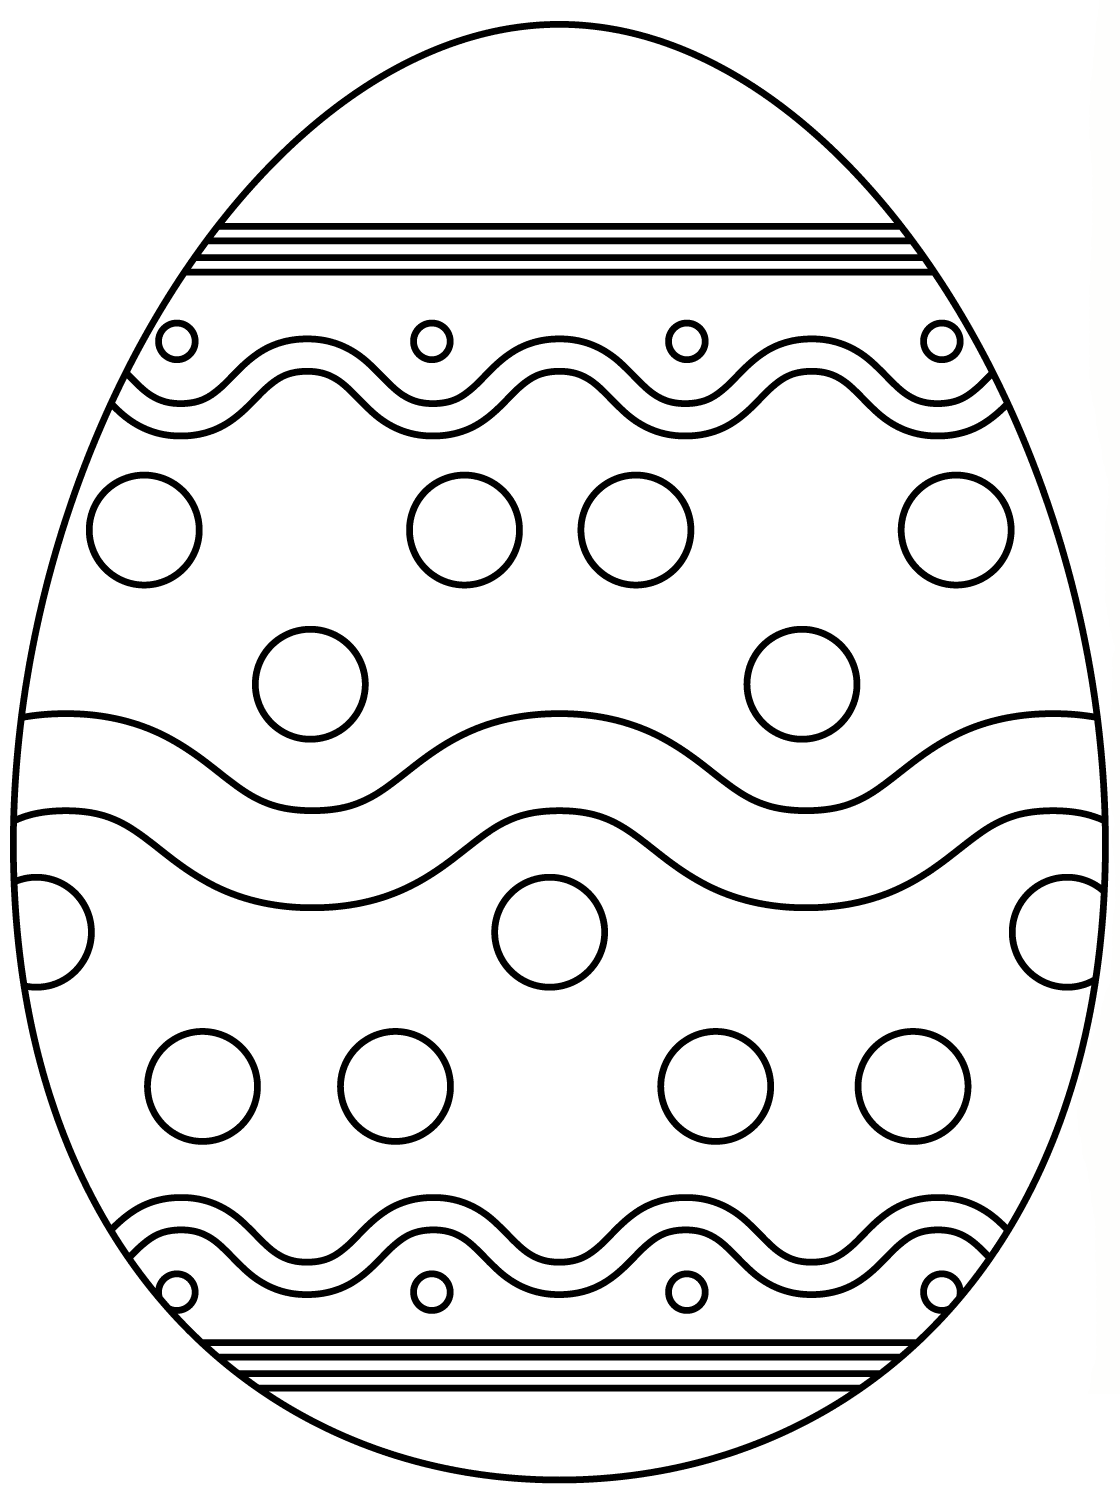 Easter Egg With Abstract Pattern 4 Coloring Page